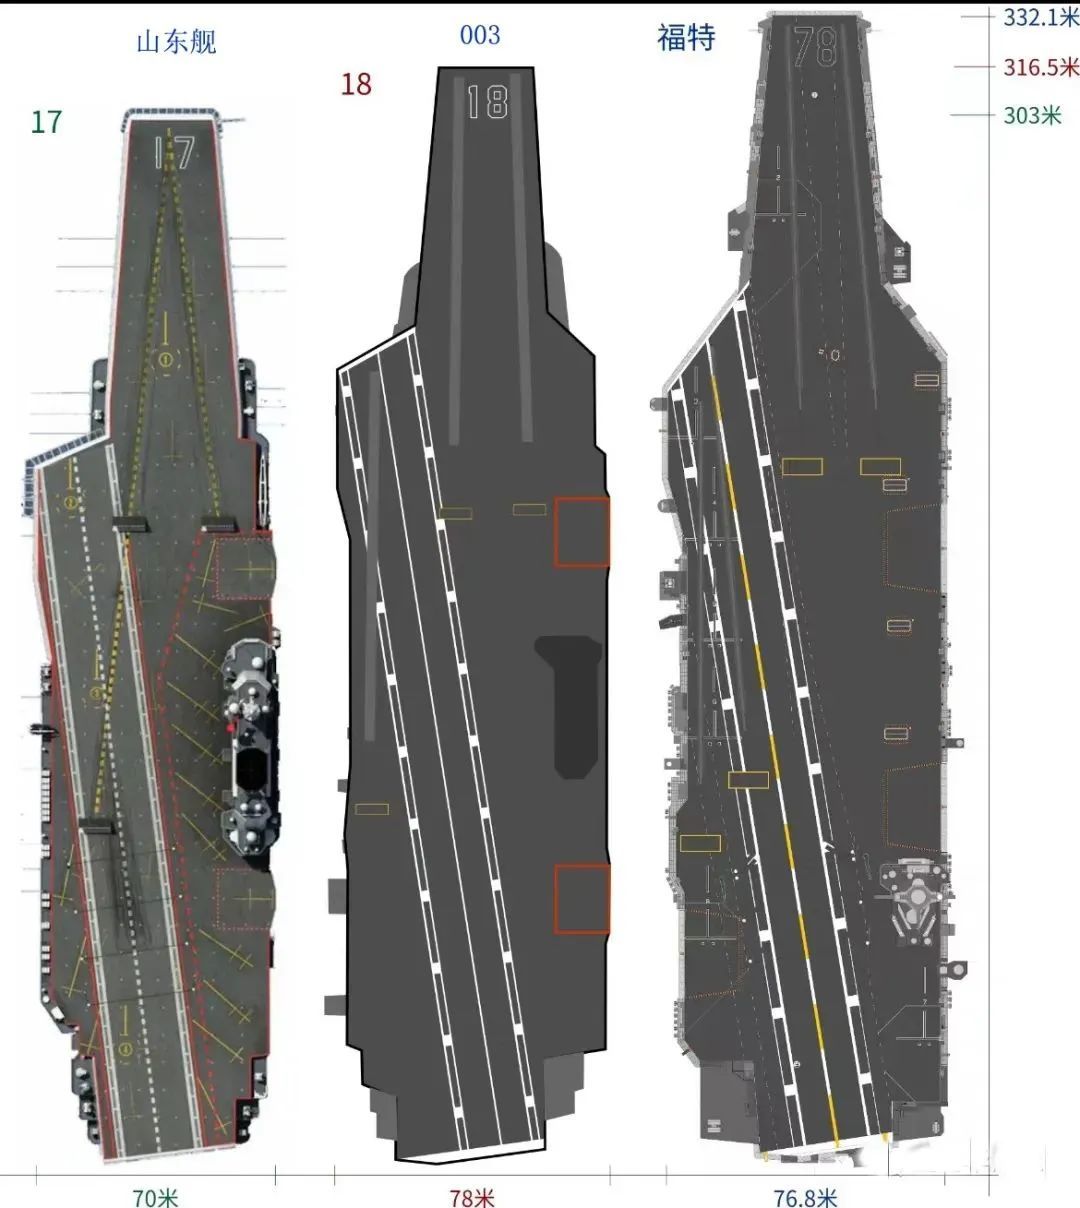 China's 003 Aircraft Carrier (former 002) | Page 5 | Indian Defence Forum